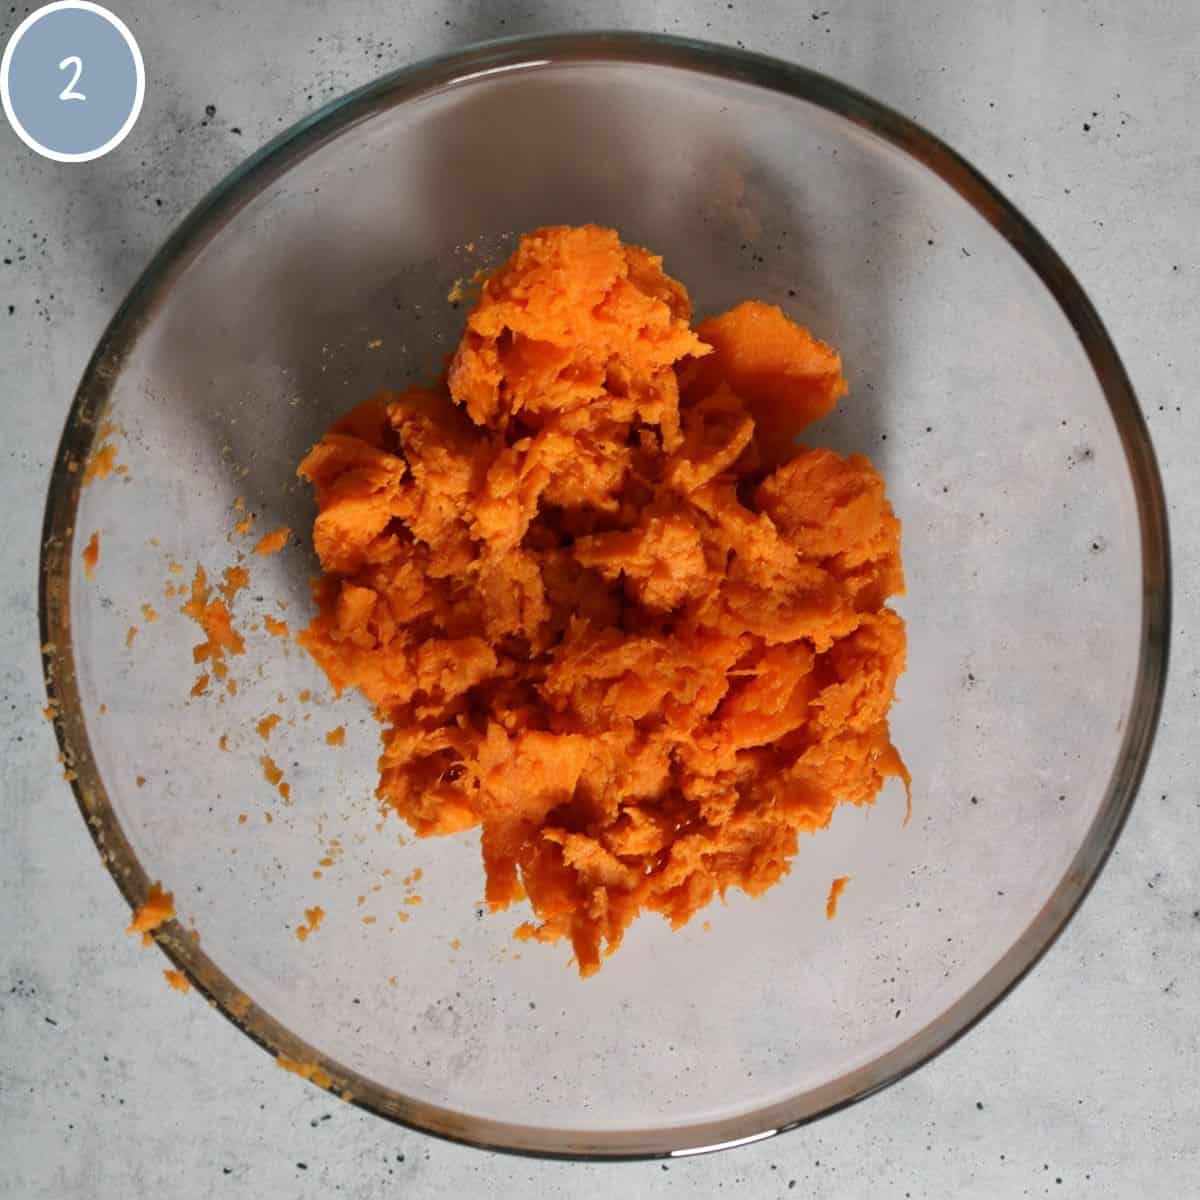 Cooked sweet potato mashed up in a glass bowl.